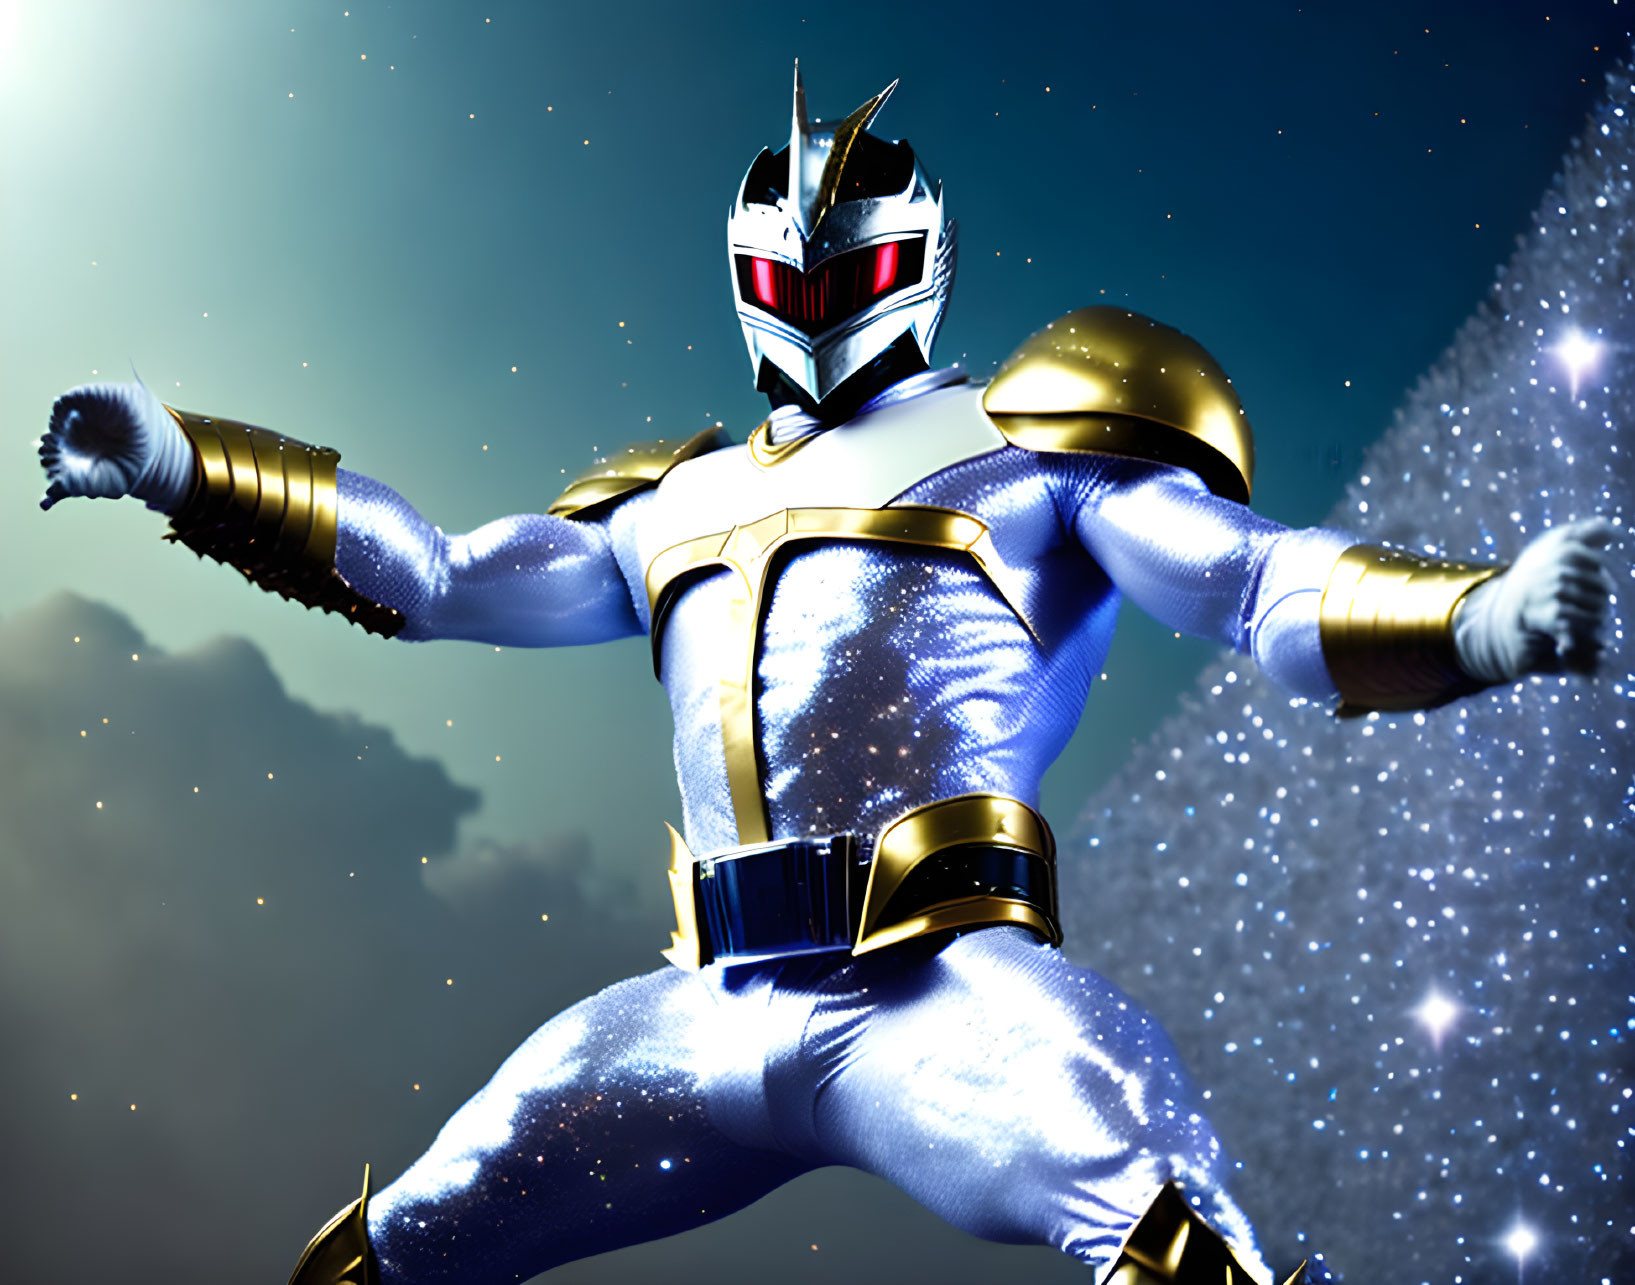 Silver and Gold Superhero Costume Against Starry Cosmos Background